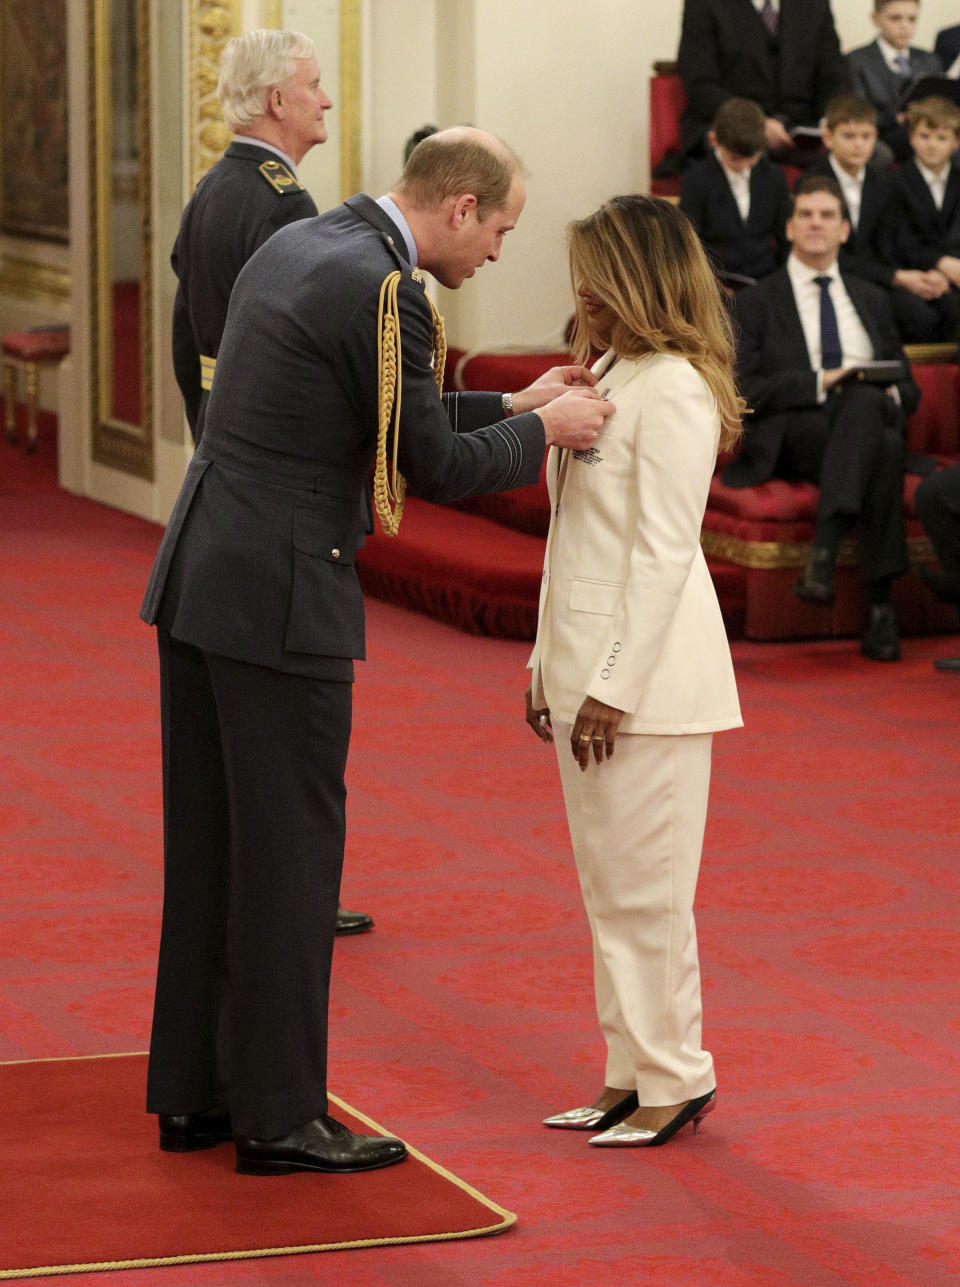 Rapper and singer MIA, real name Mathangi Arulpragasam, is made an MBE by Prince William Duke of Cambridge, left, at Buckingham Palace, in London, Tuesday Jan. 14, 2020. The honorary award is conferred in recognition of contributions to the arts, sport, sciences, and charitable works. (Jonathan Brady/PA via AP)